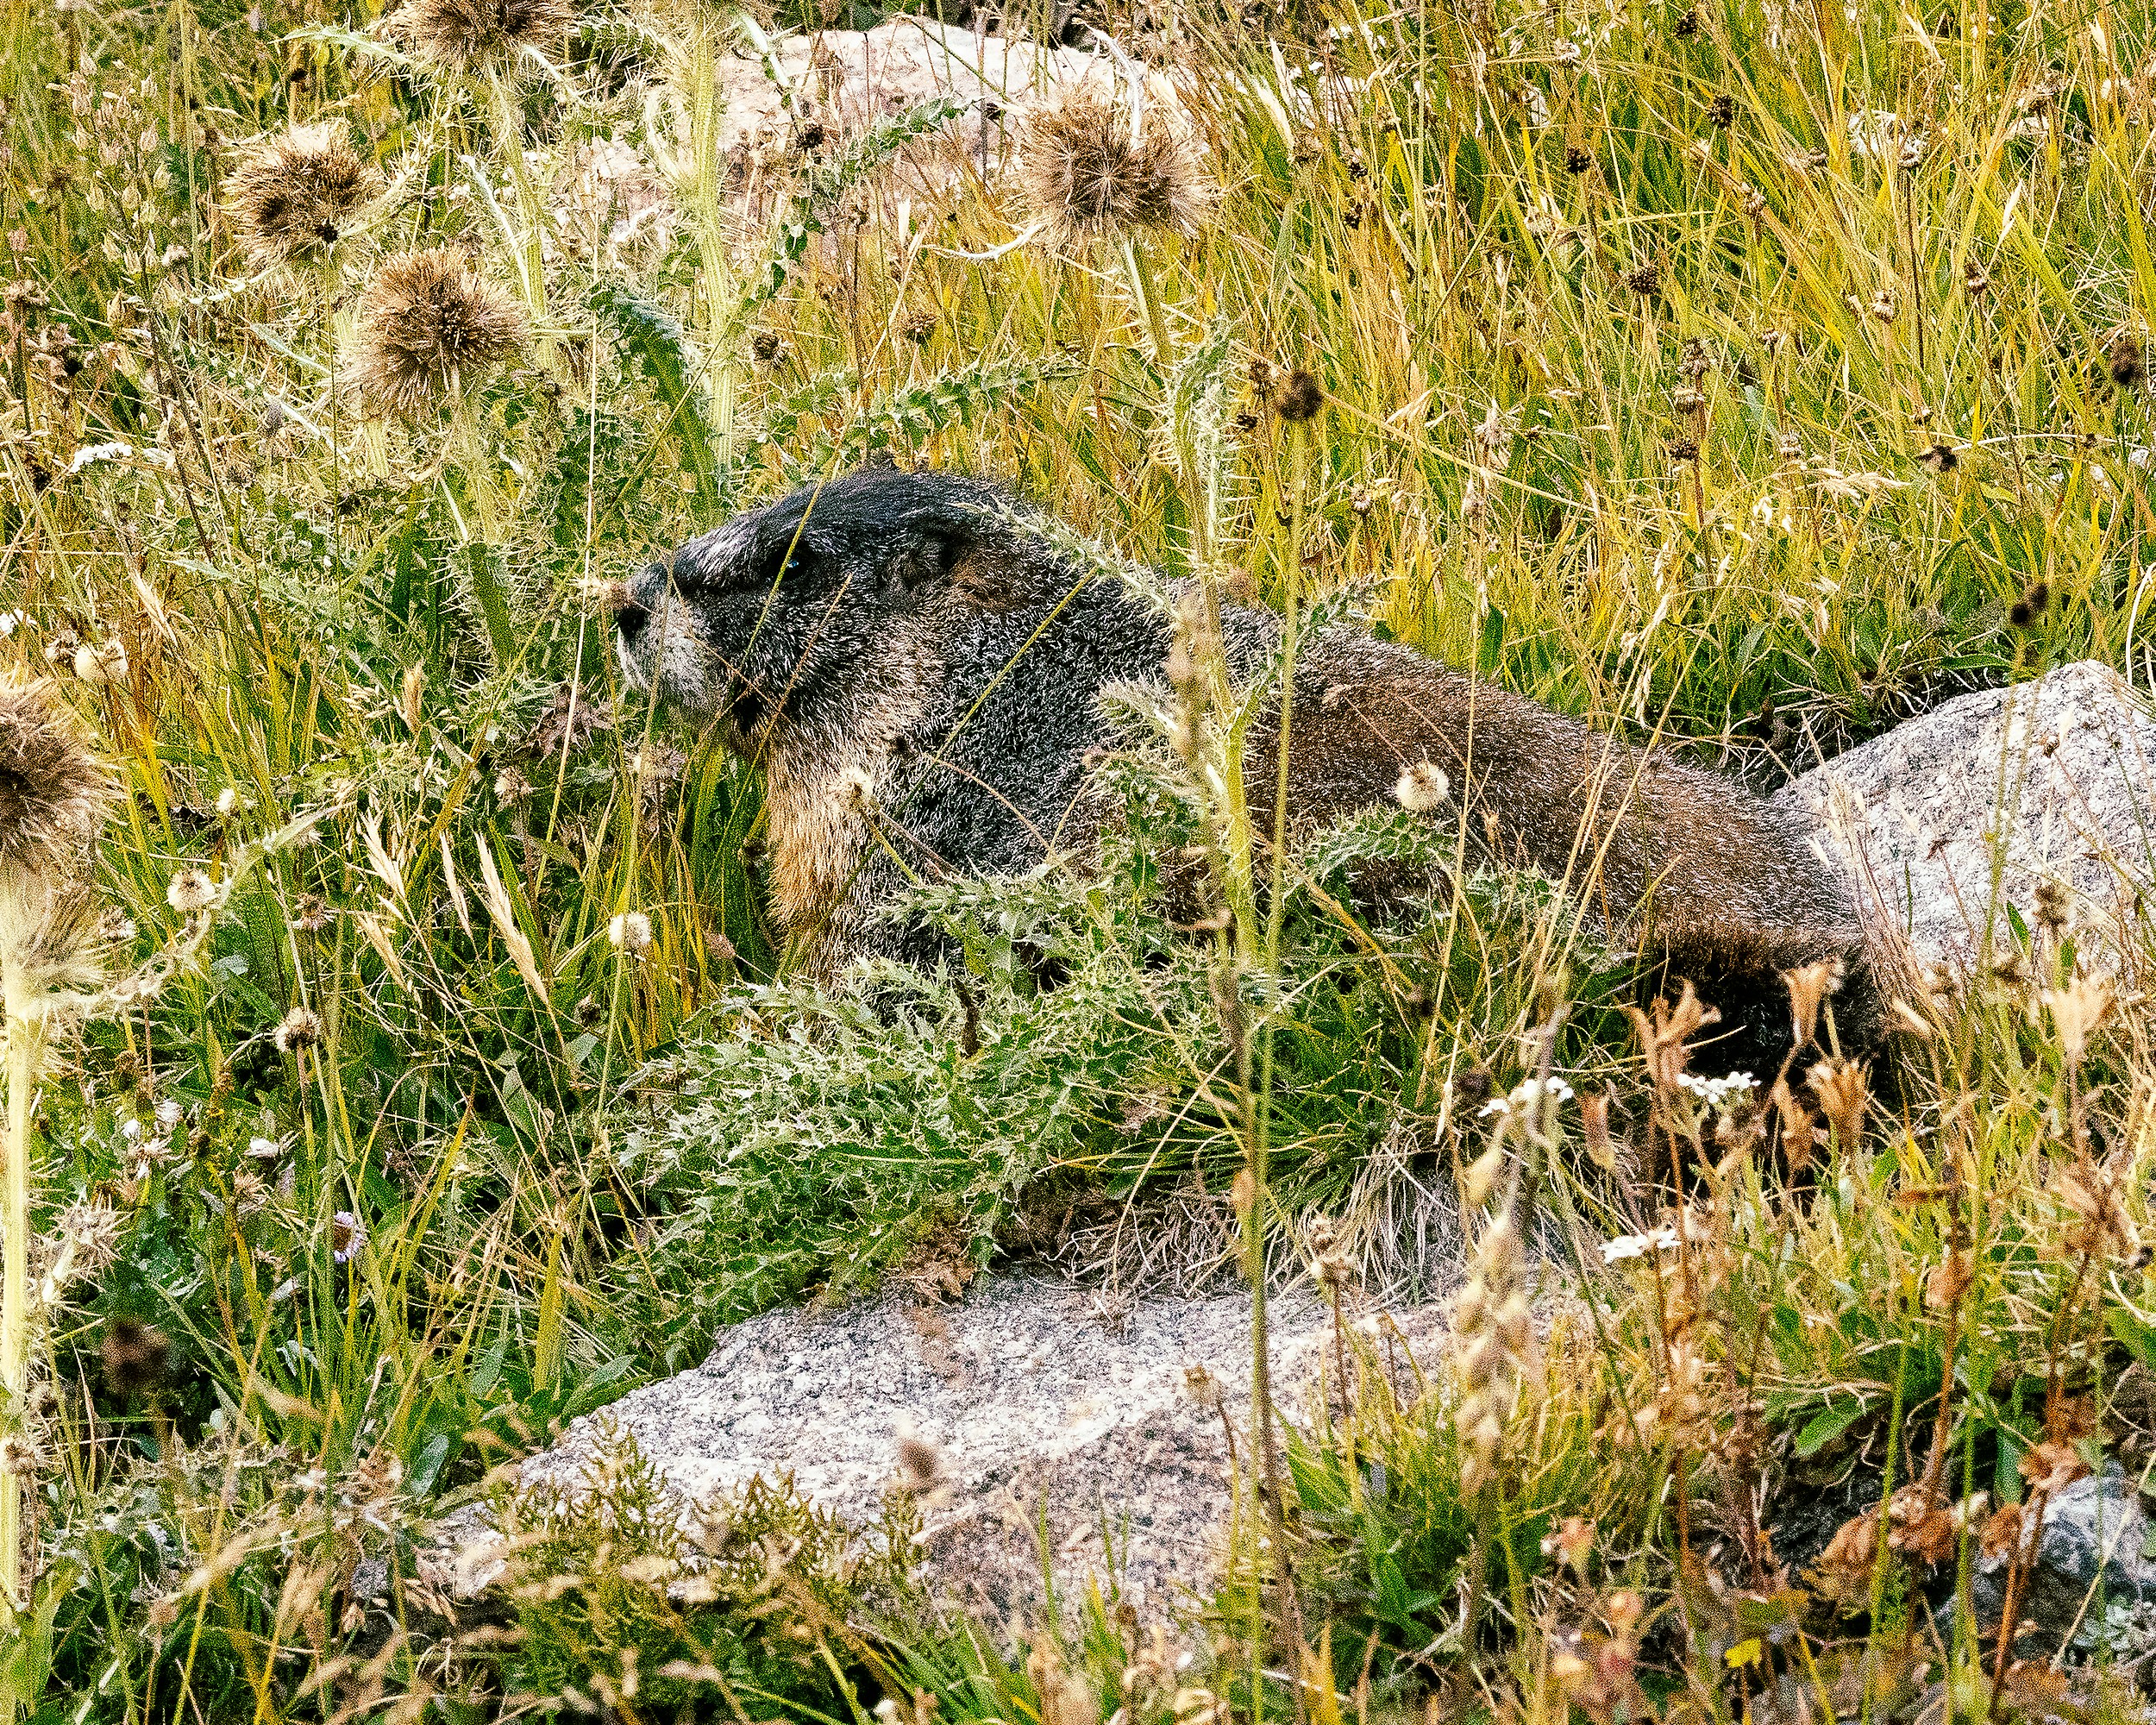 A groundhog or marmot eating some grass - photographed at the Alpine Tundra in Colorado at Rocky Mountain National Park.